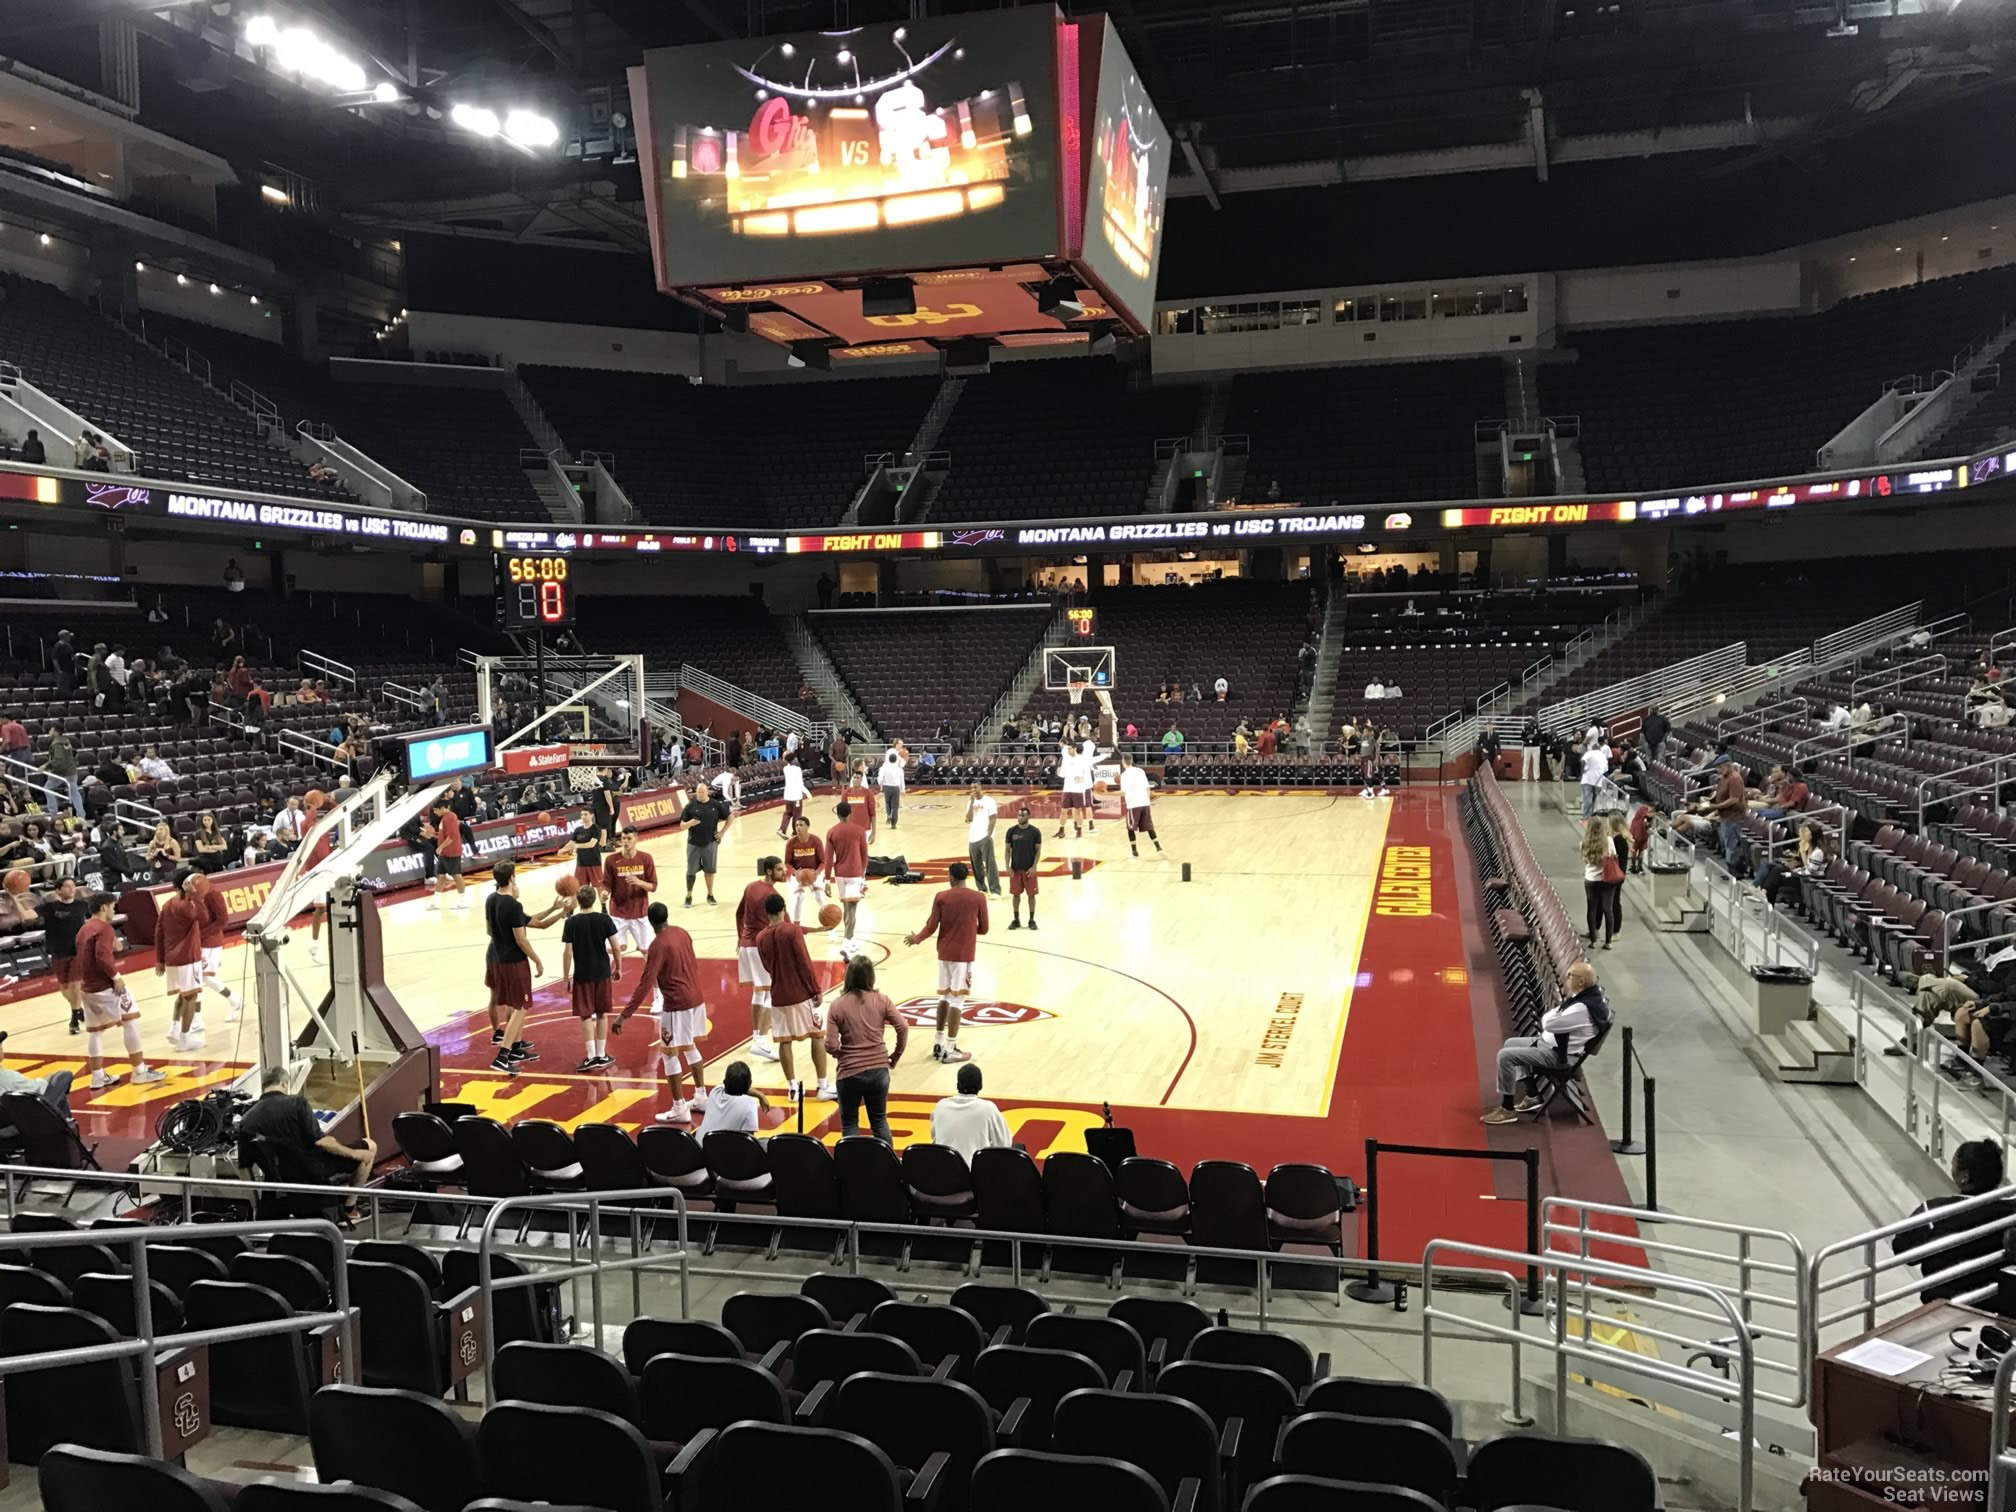 section 123, row 10 seat view  - galen center